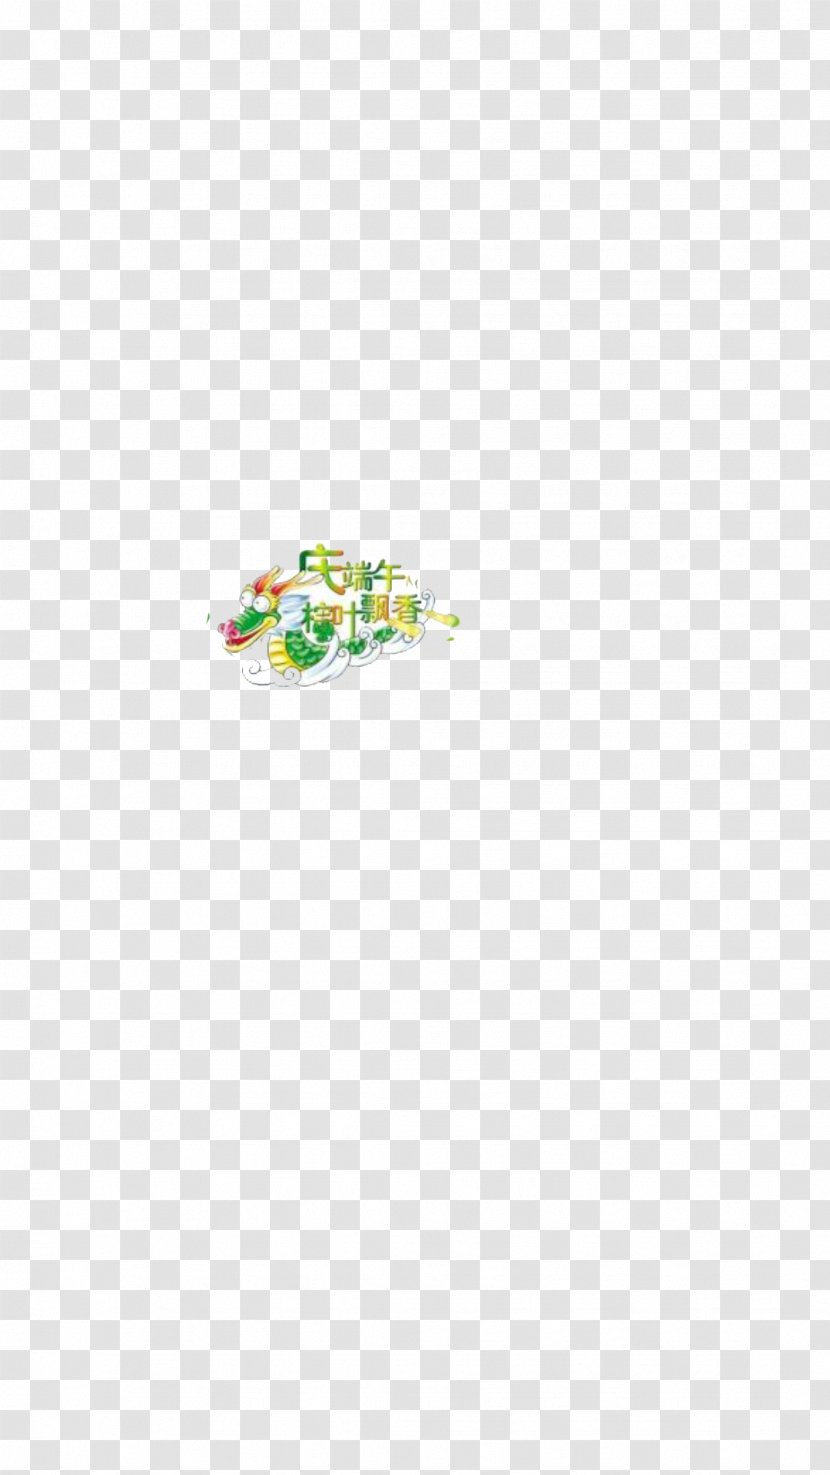 Material Green Pattern - Yellow - Dragon Boat Festival Transparent PNG